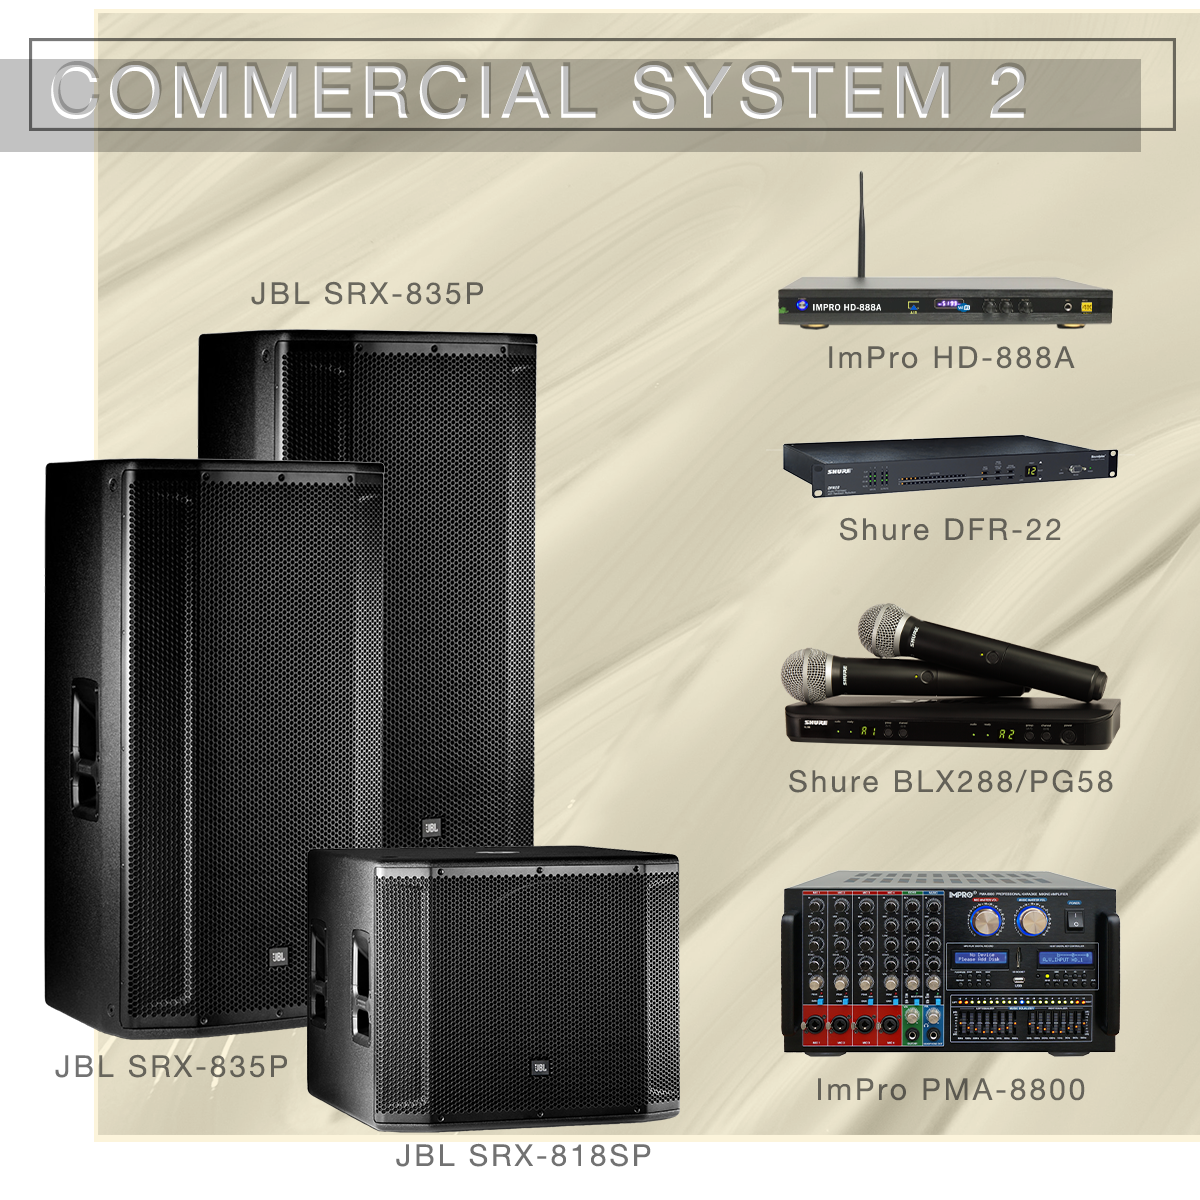 Commercial System 2 Karaoke System Package with JBL Speakers, Shure Microphones, and Karaoke Player